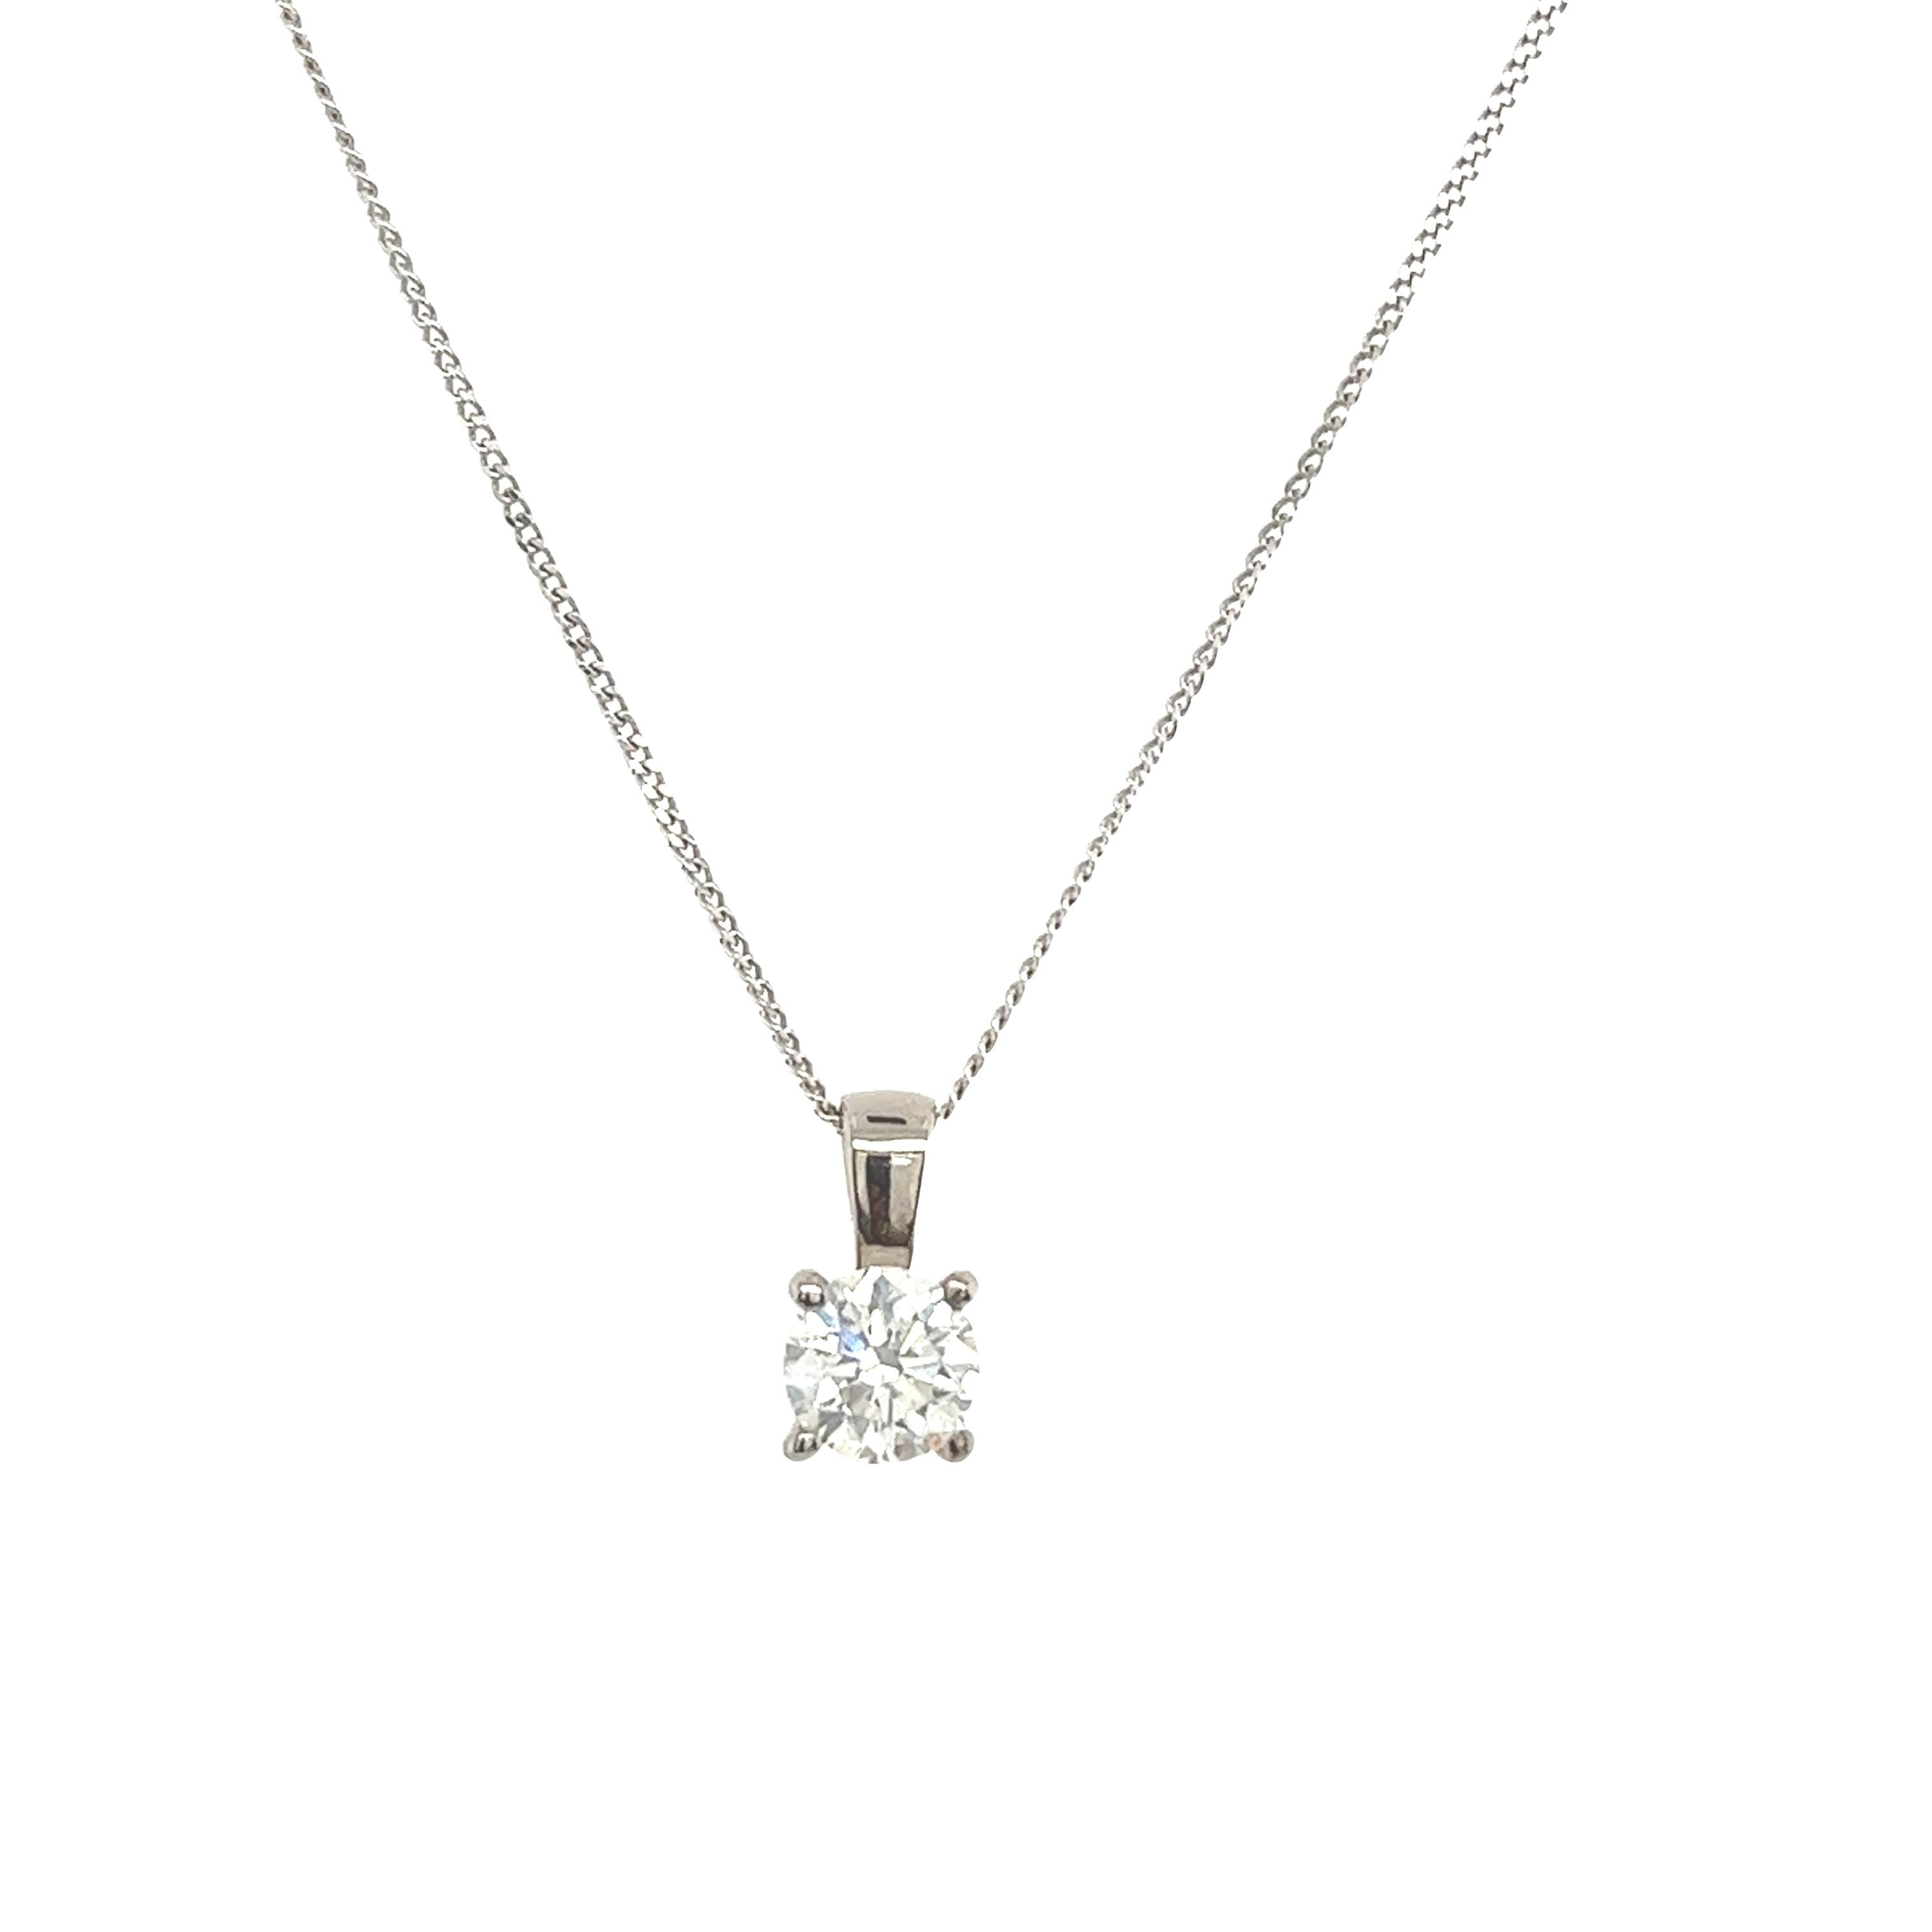 18ct White Gold Diamond Pendant, Suspended from 18